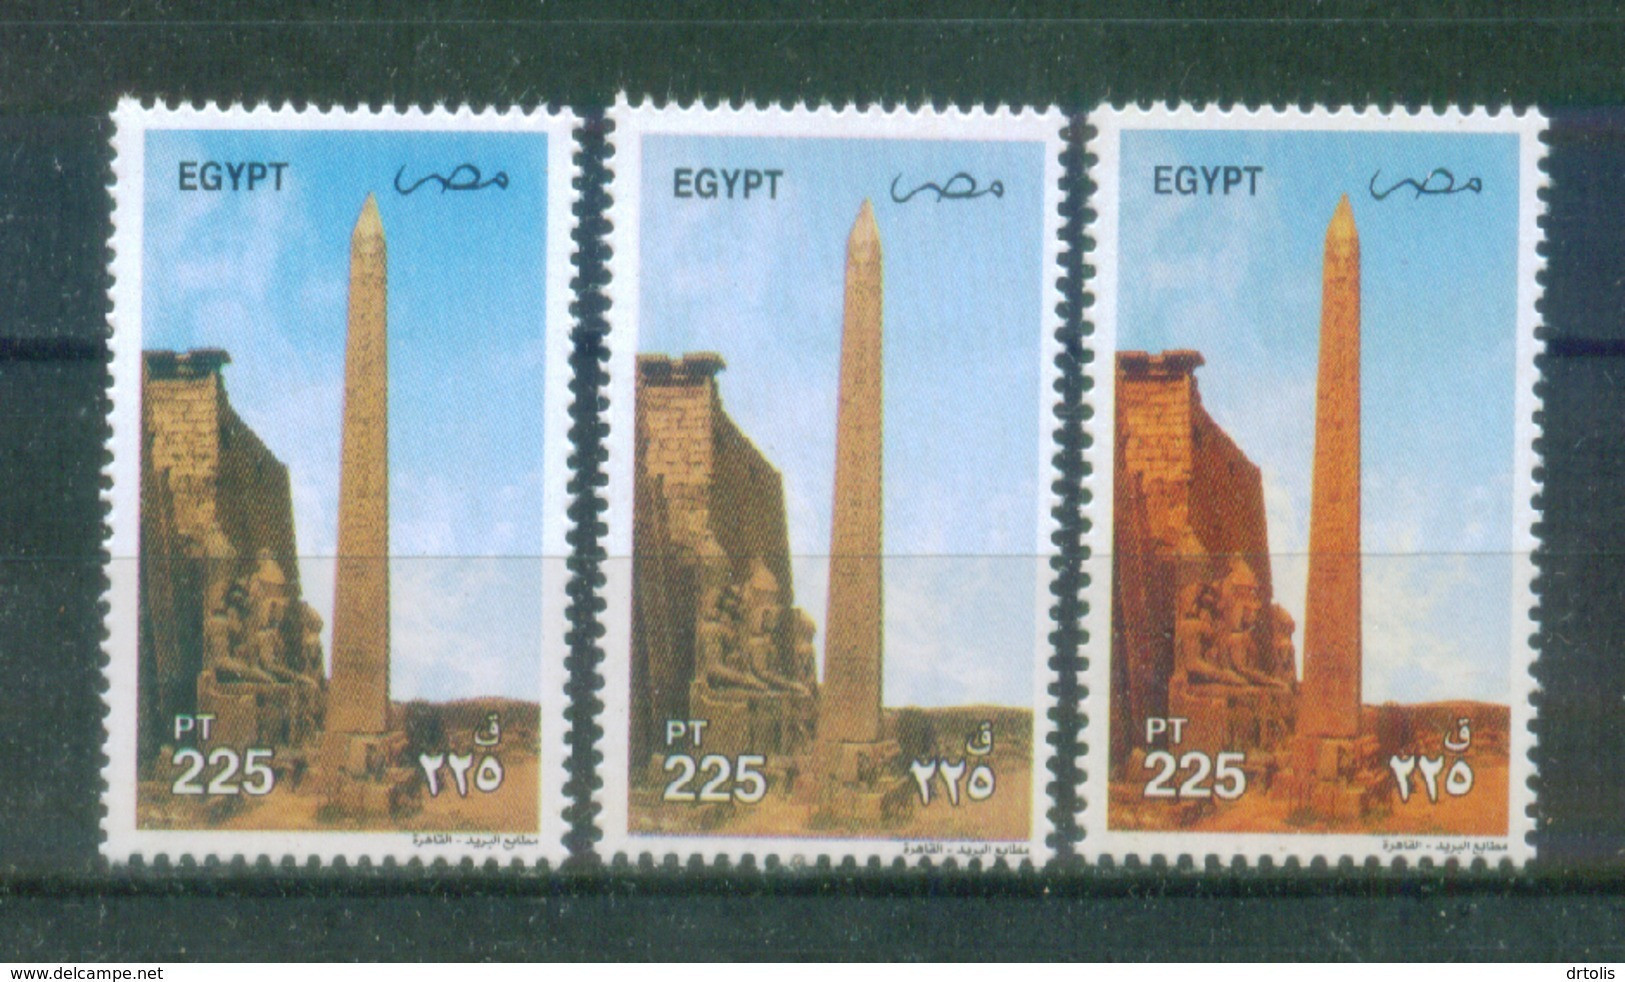 EGYPT / 2002 / RAMESES II OBELISK ; LUXOR / 3 DIFFERENT ISSUES / EGYPTOLOGY / ARCHEOLOGY / EGYPT ANTIQUITY / MNH - Unused Stamps